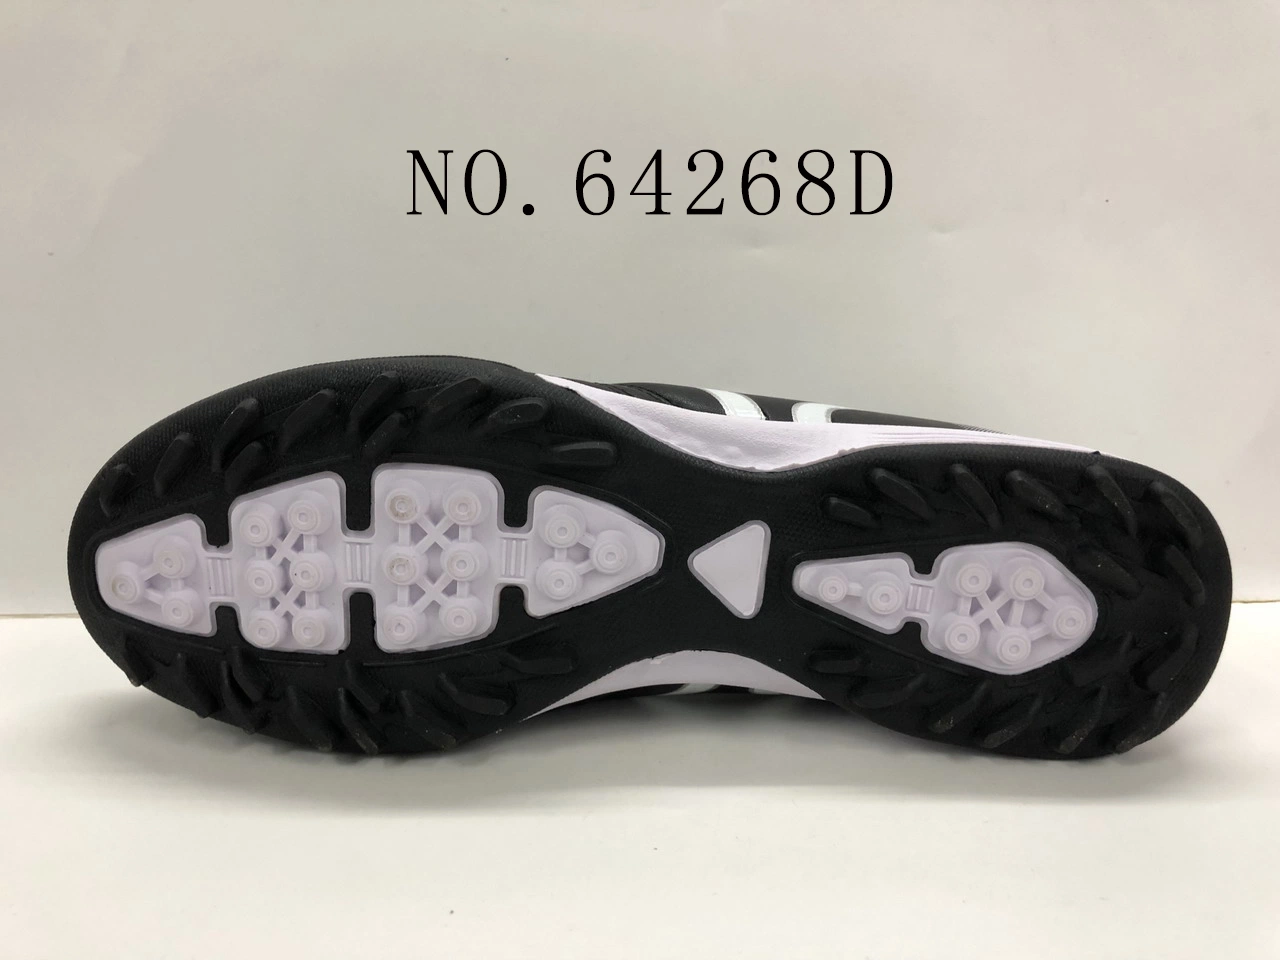 Four Color Unisex PU Outdoor Fashion Football Shoes Casual Shoes Rubber Outsole Shoes (NO. 64268)